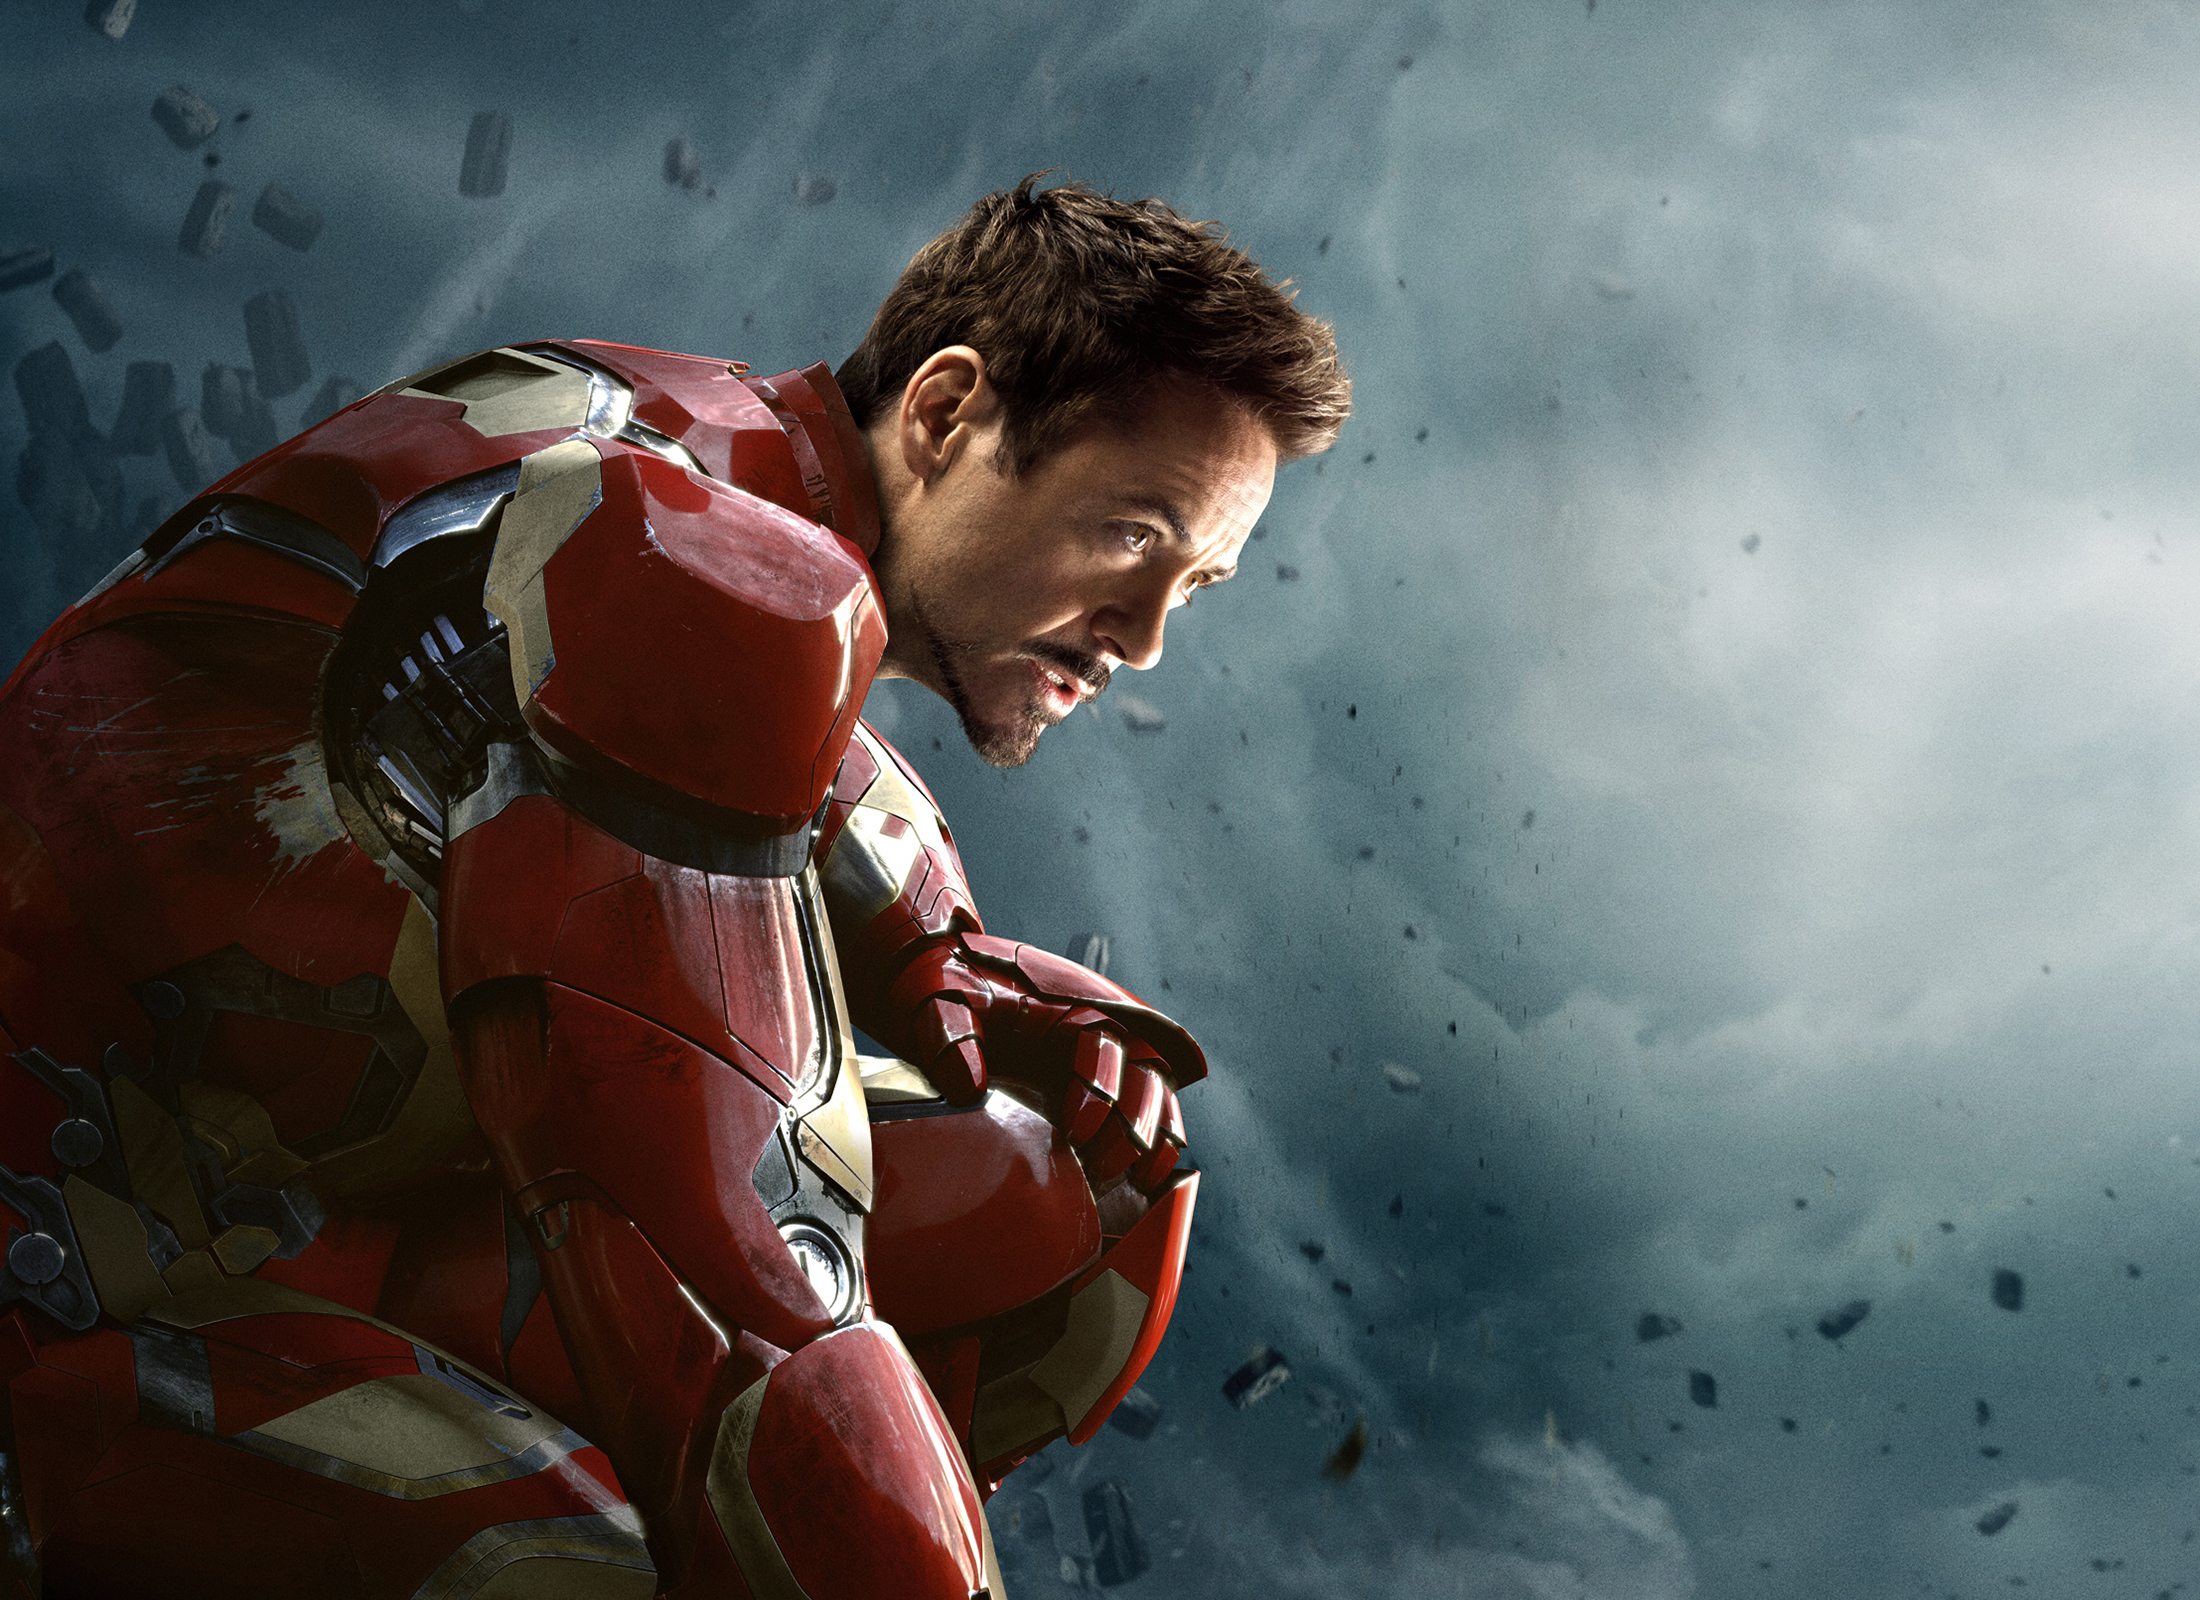 1400+ The Avengers HD Wallpapers and Backgrounds